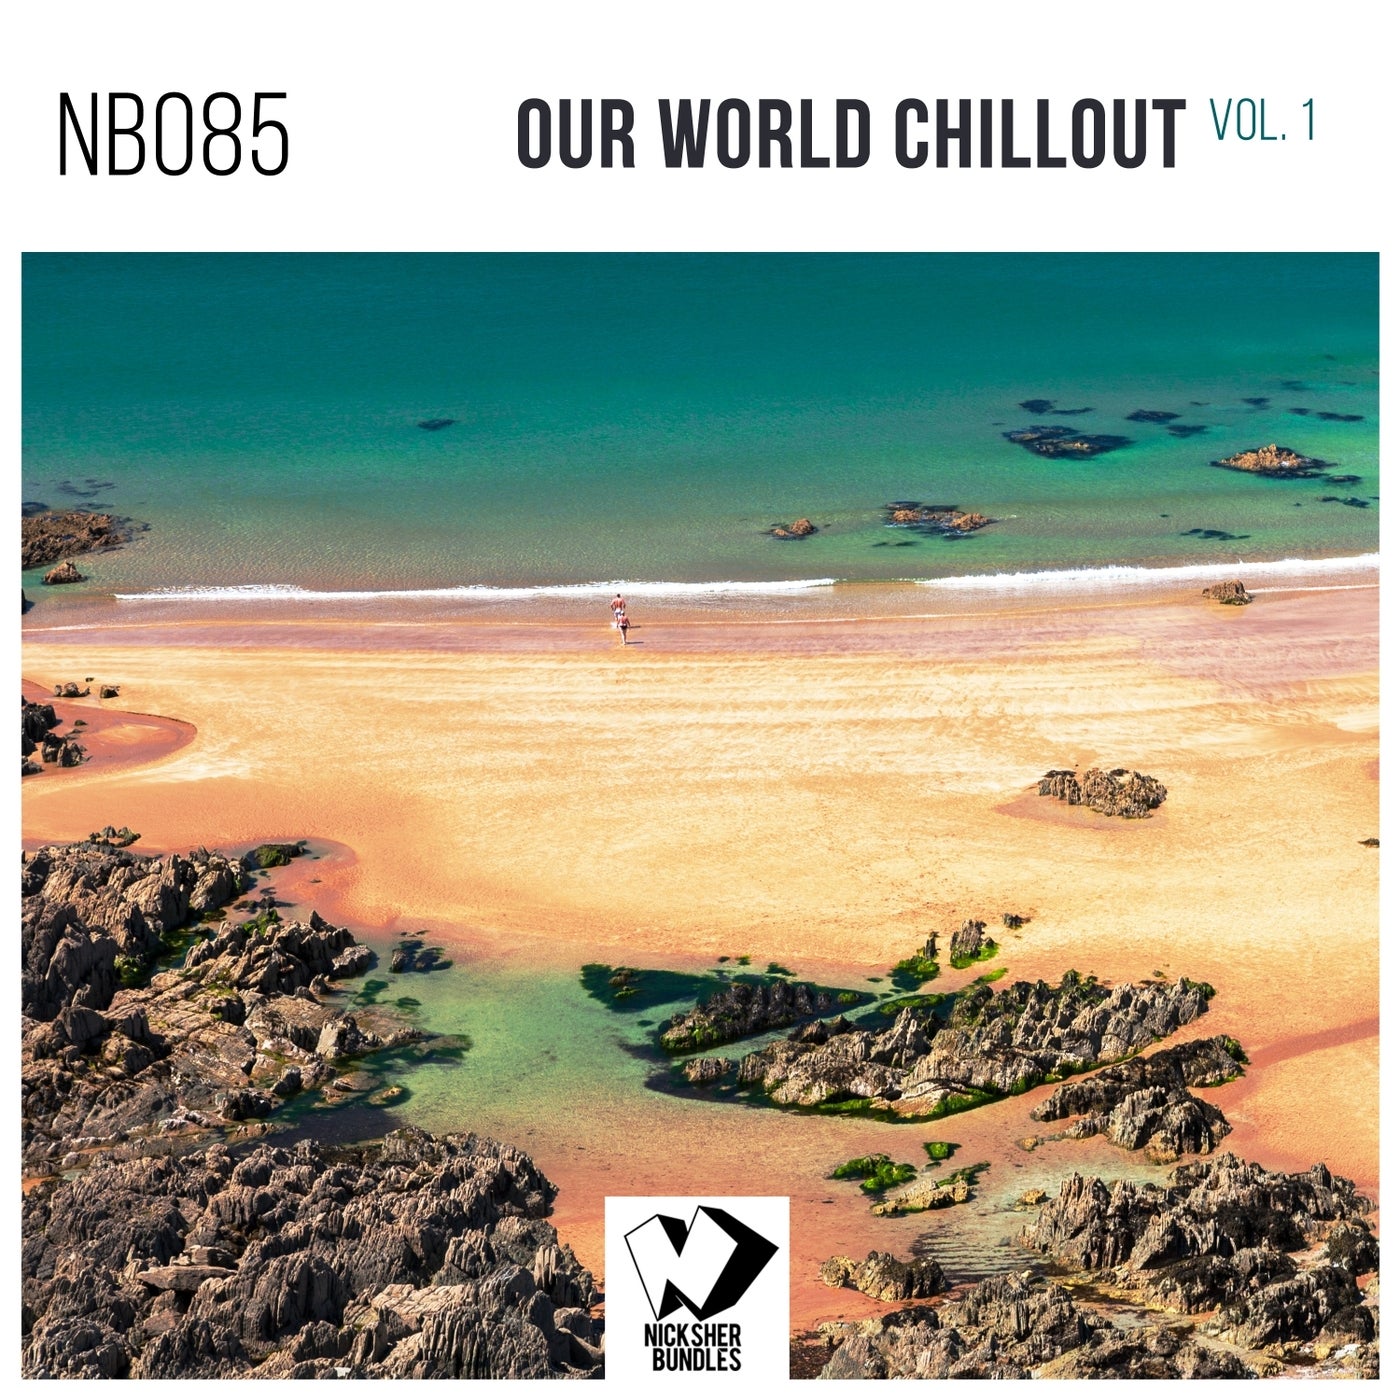 Our World Chillout Vol.1